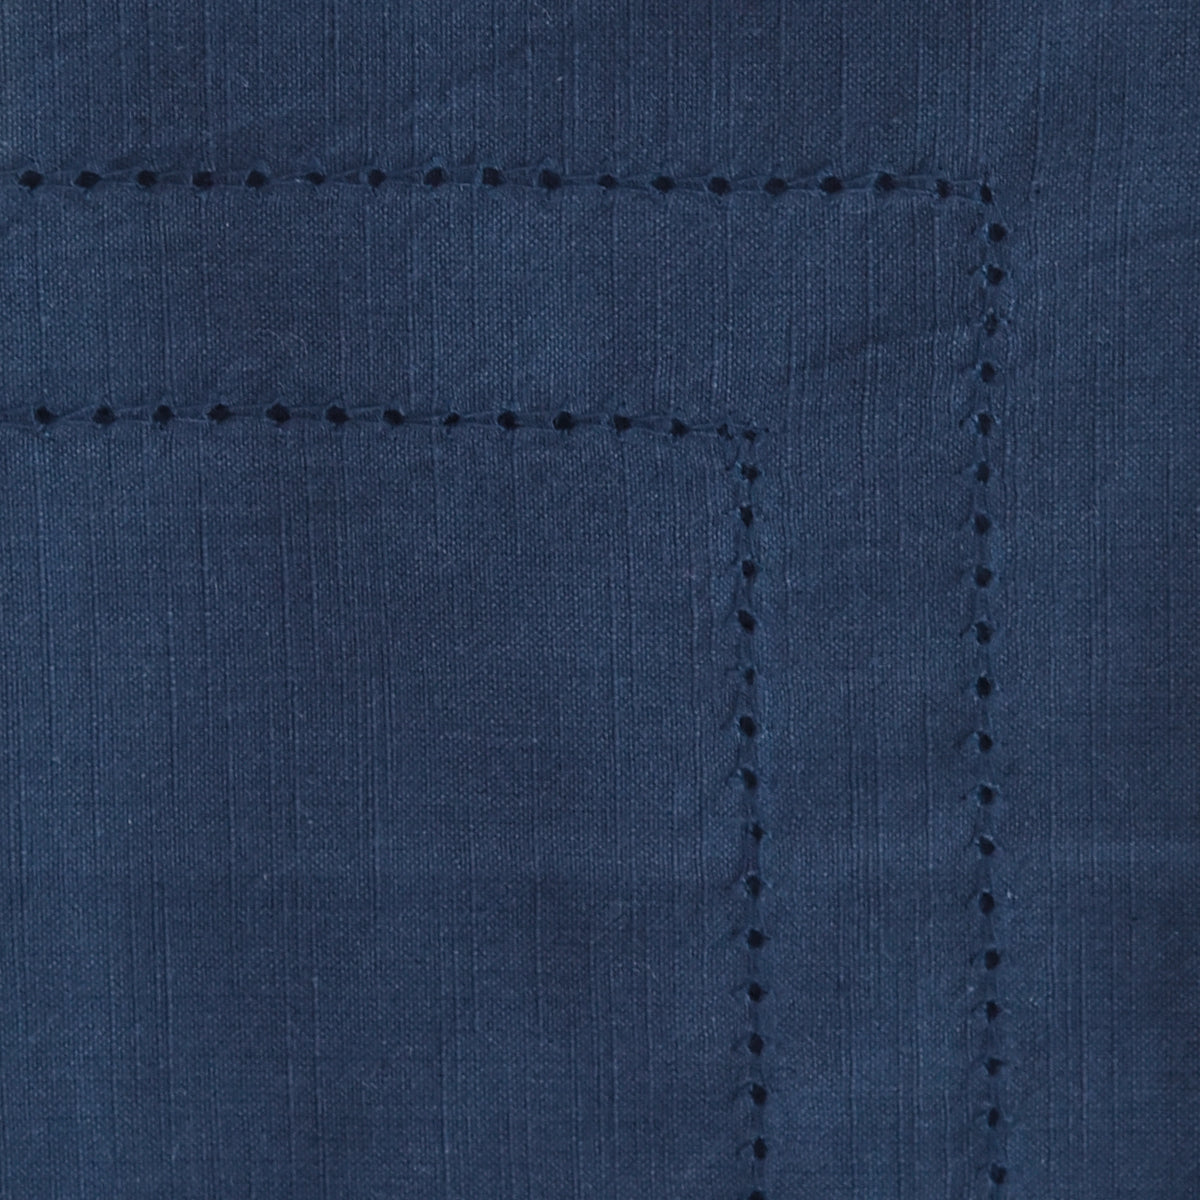 Close-up view of a blue double hemstitch cloth napkin with hemstitch details